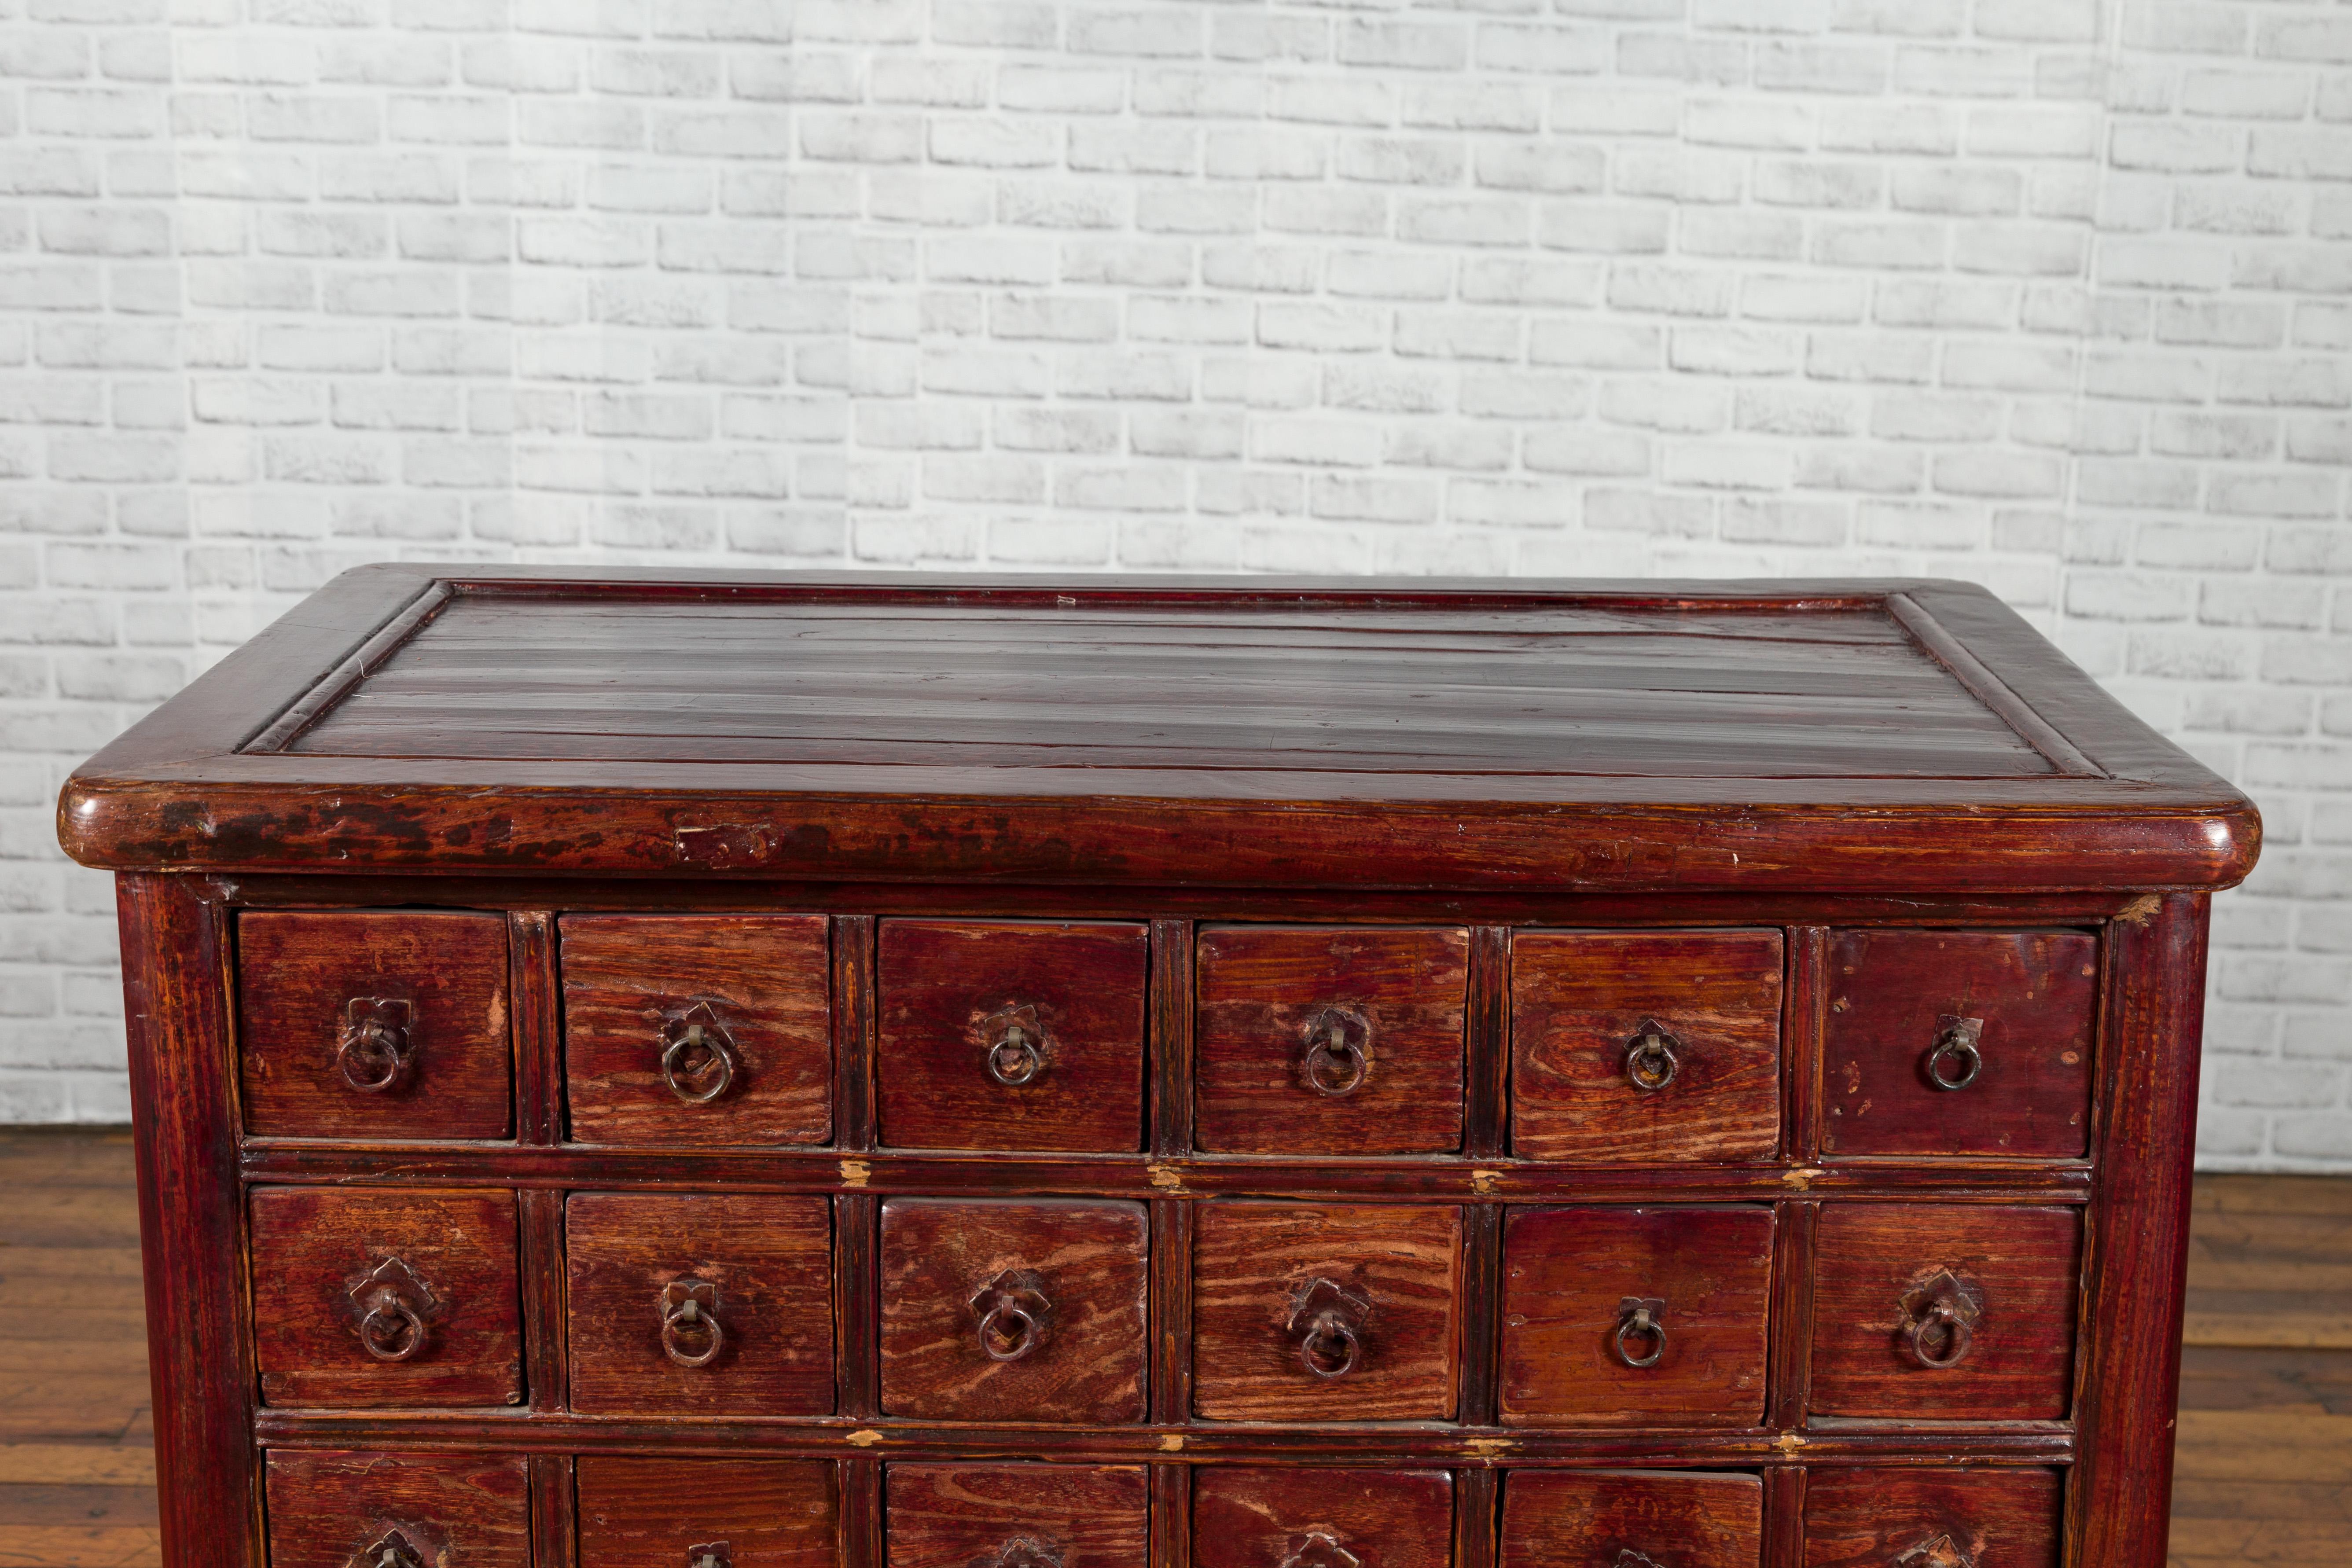 Chinese Qing Dynasty Period Apothecary Chest with 32 Drawers and Aged Patina For Sale 6